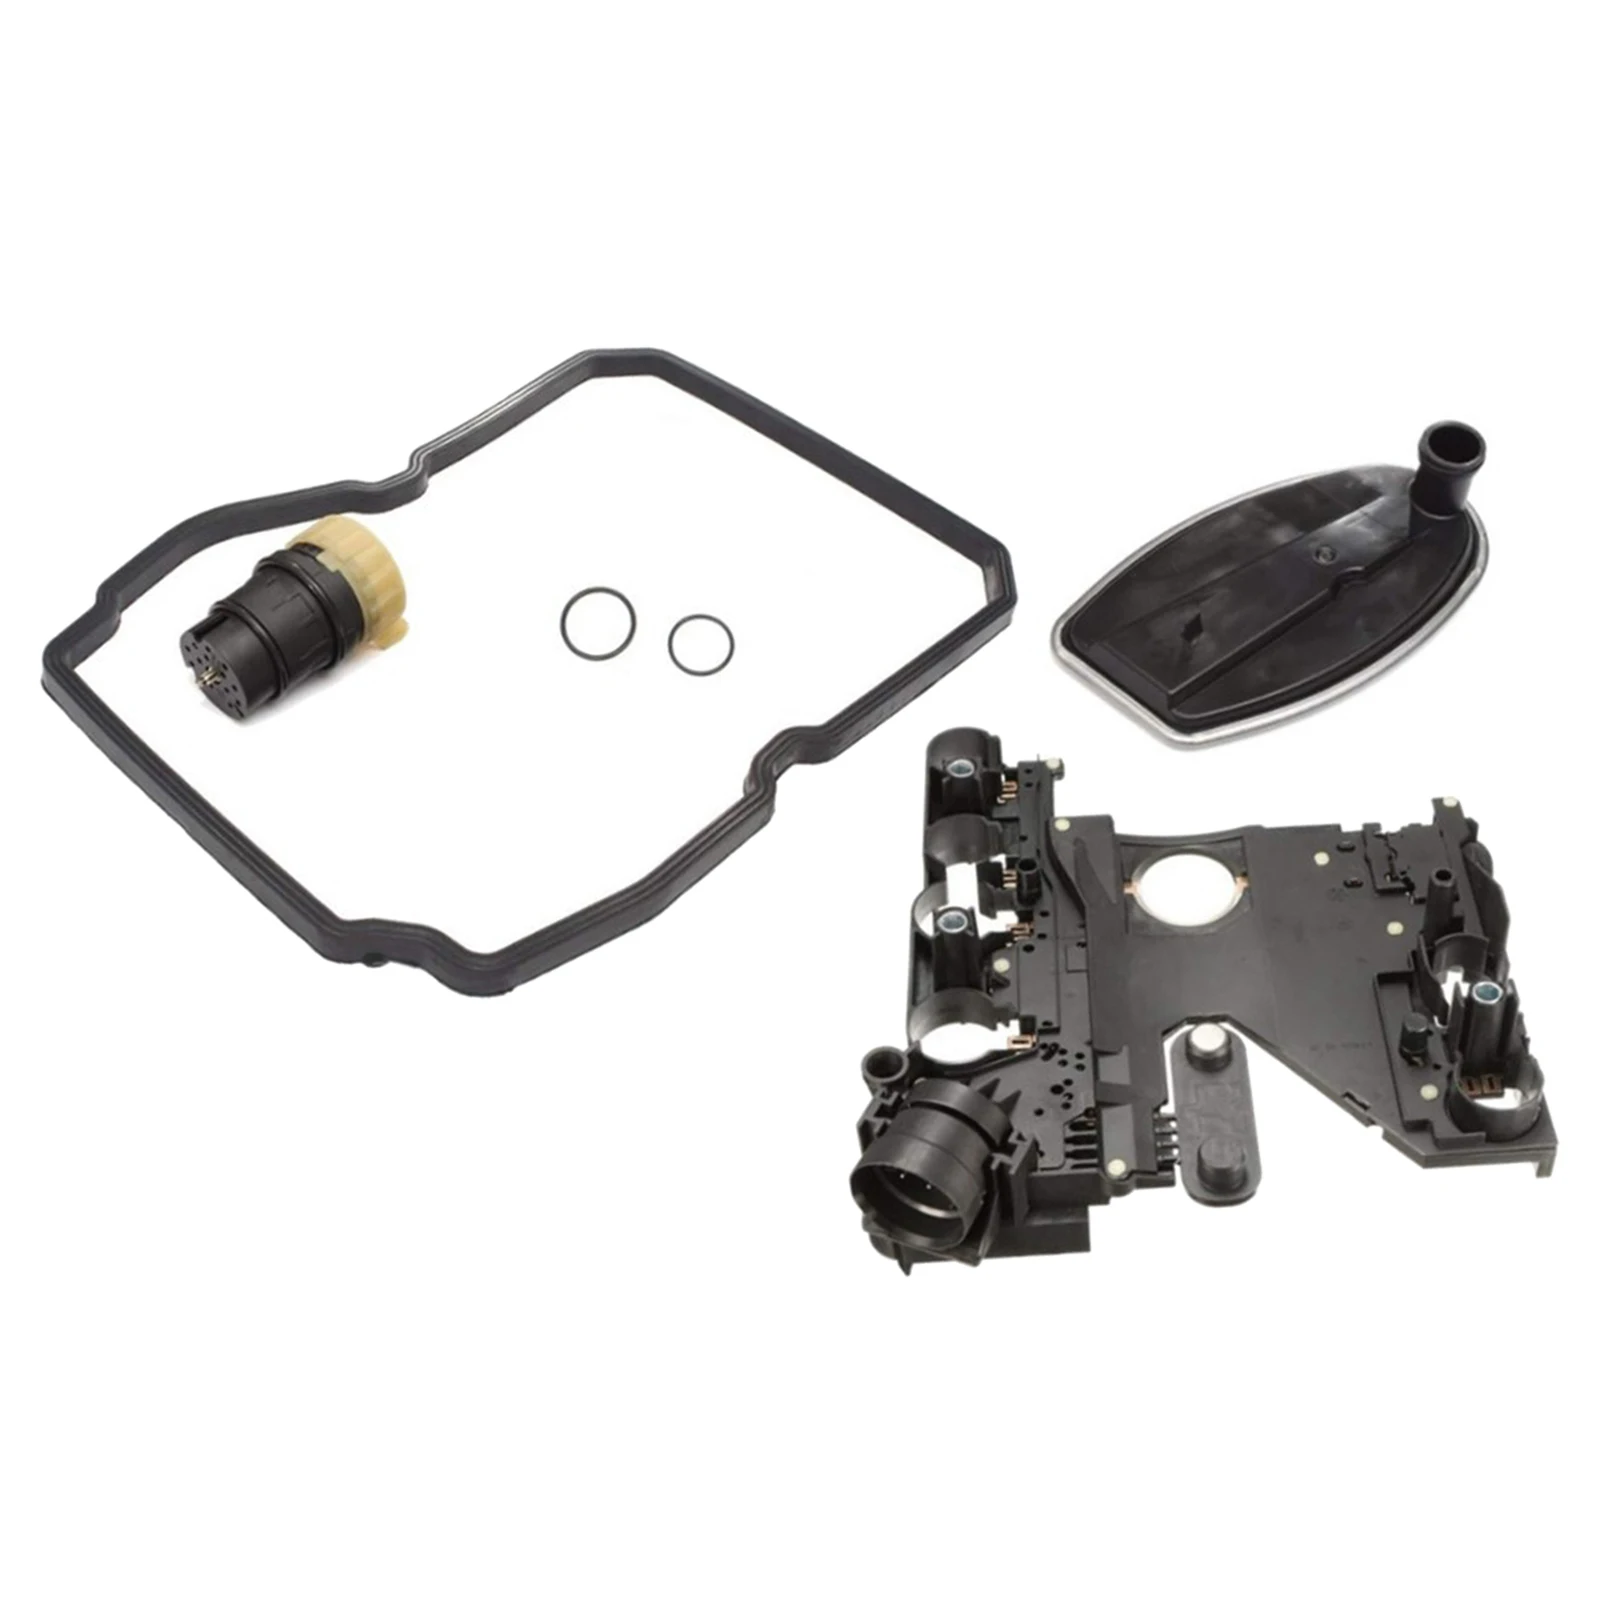 Gearbox 722.6 Transmission Conductor Plate + 13-Pin Connector Adapter Plug + Filter + 2 O-rings for Mercedes Benz